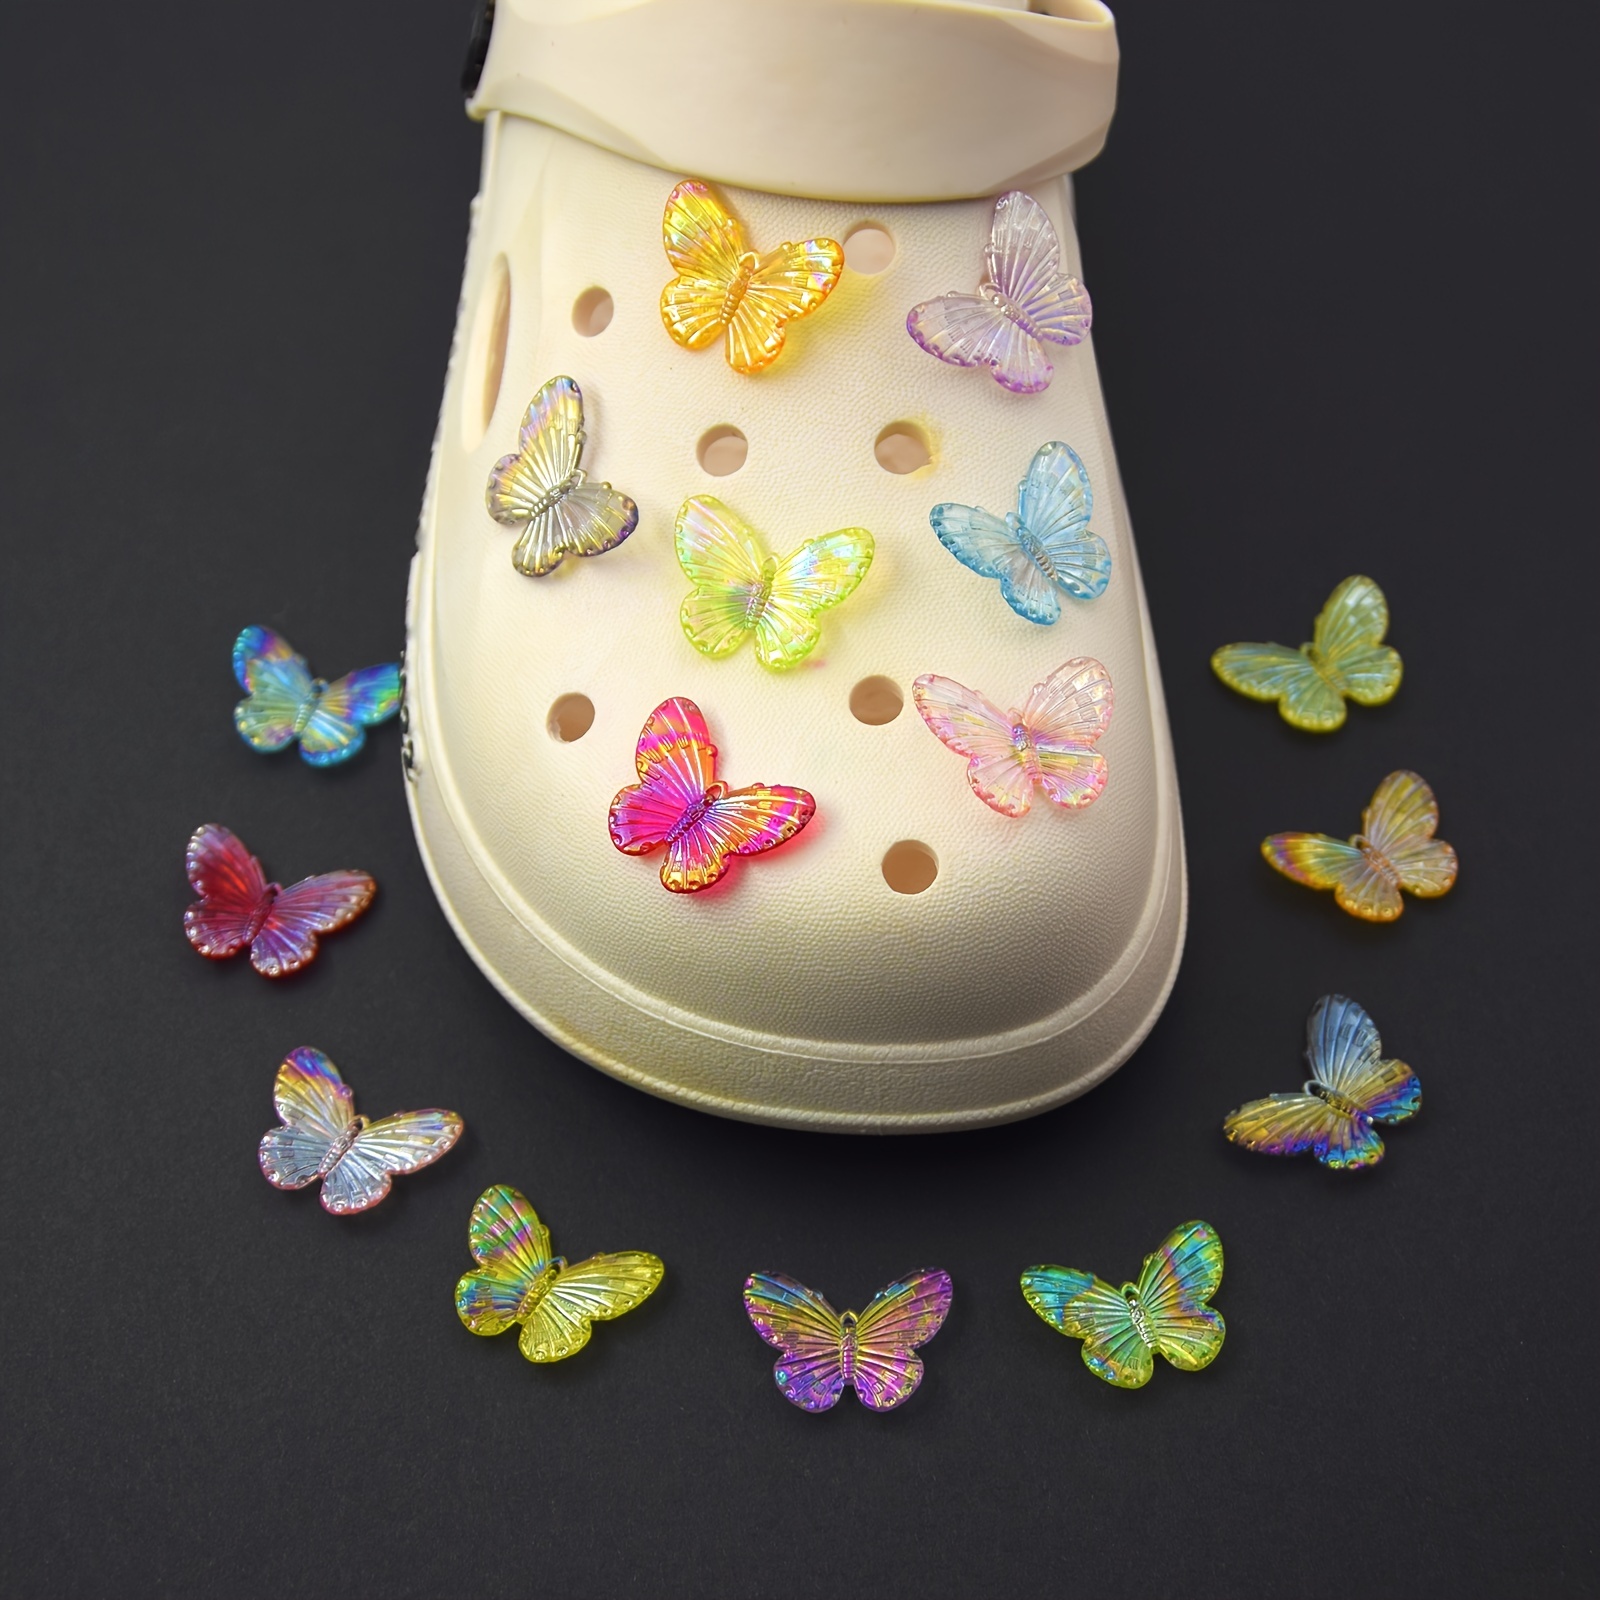 Butterfly Series Shoes Charms For Clogs Sandals Decoration, Shoes